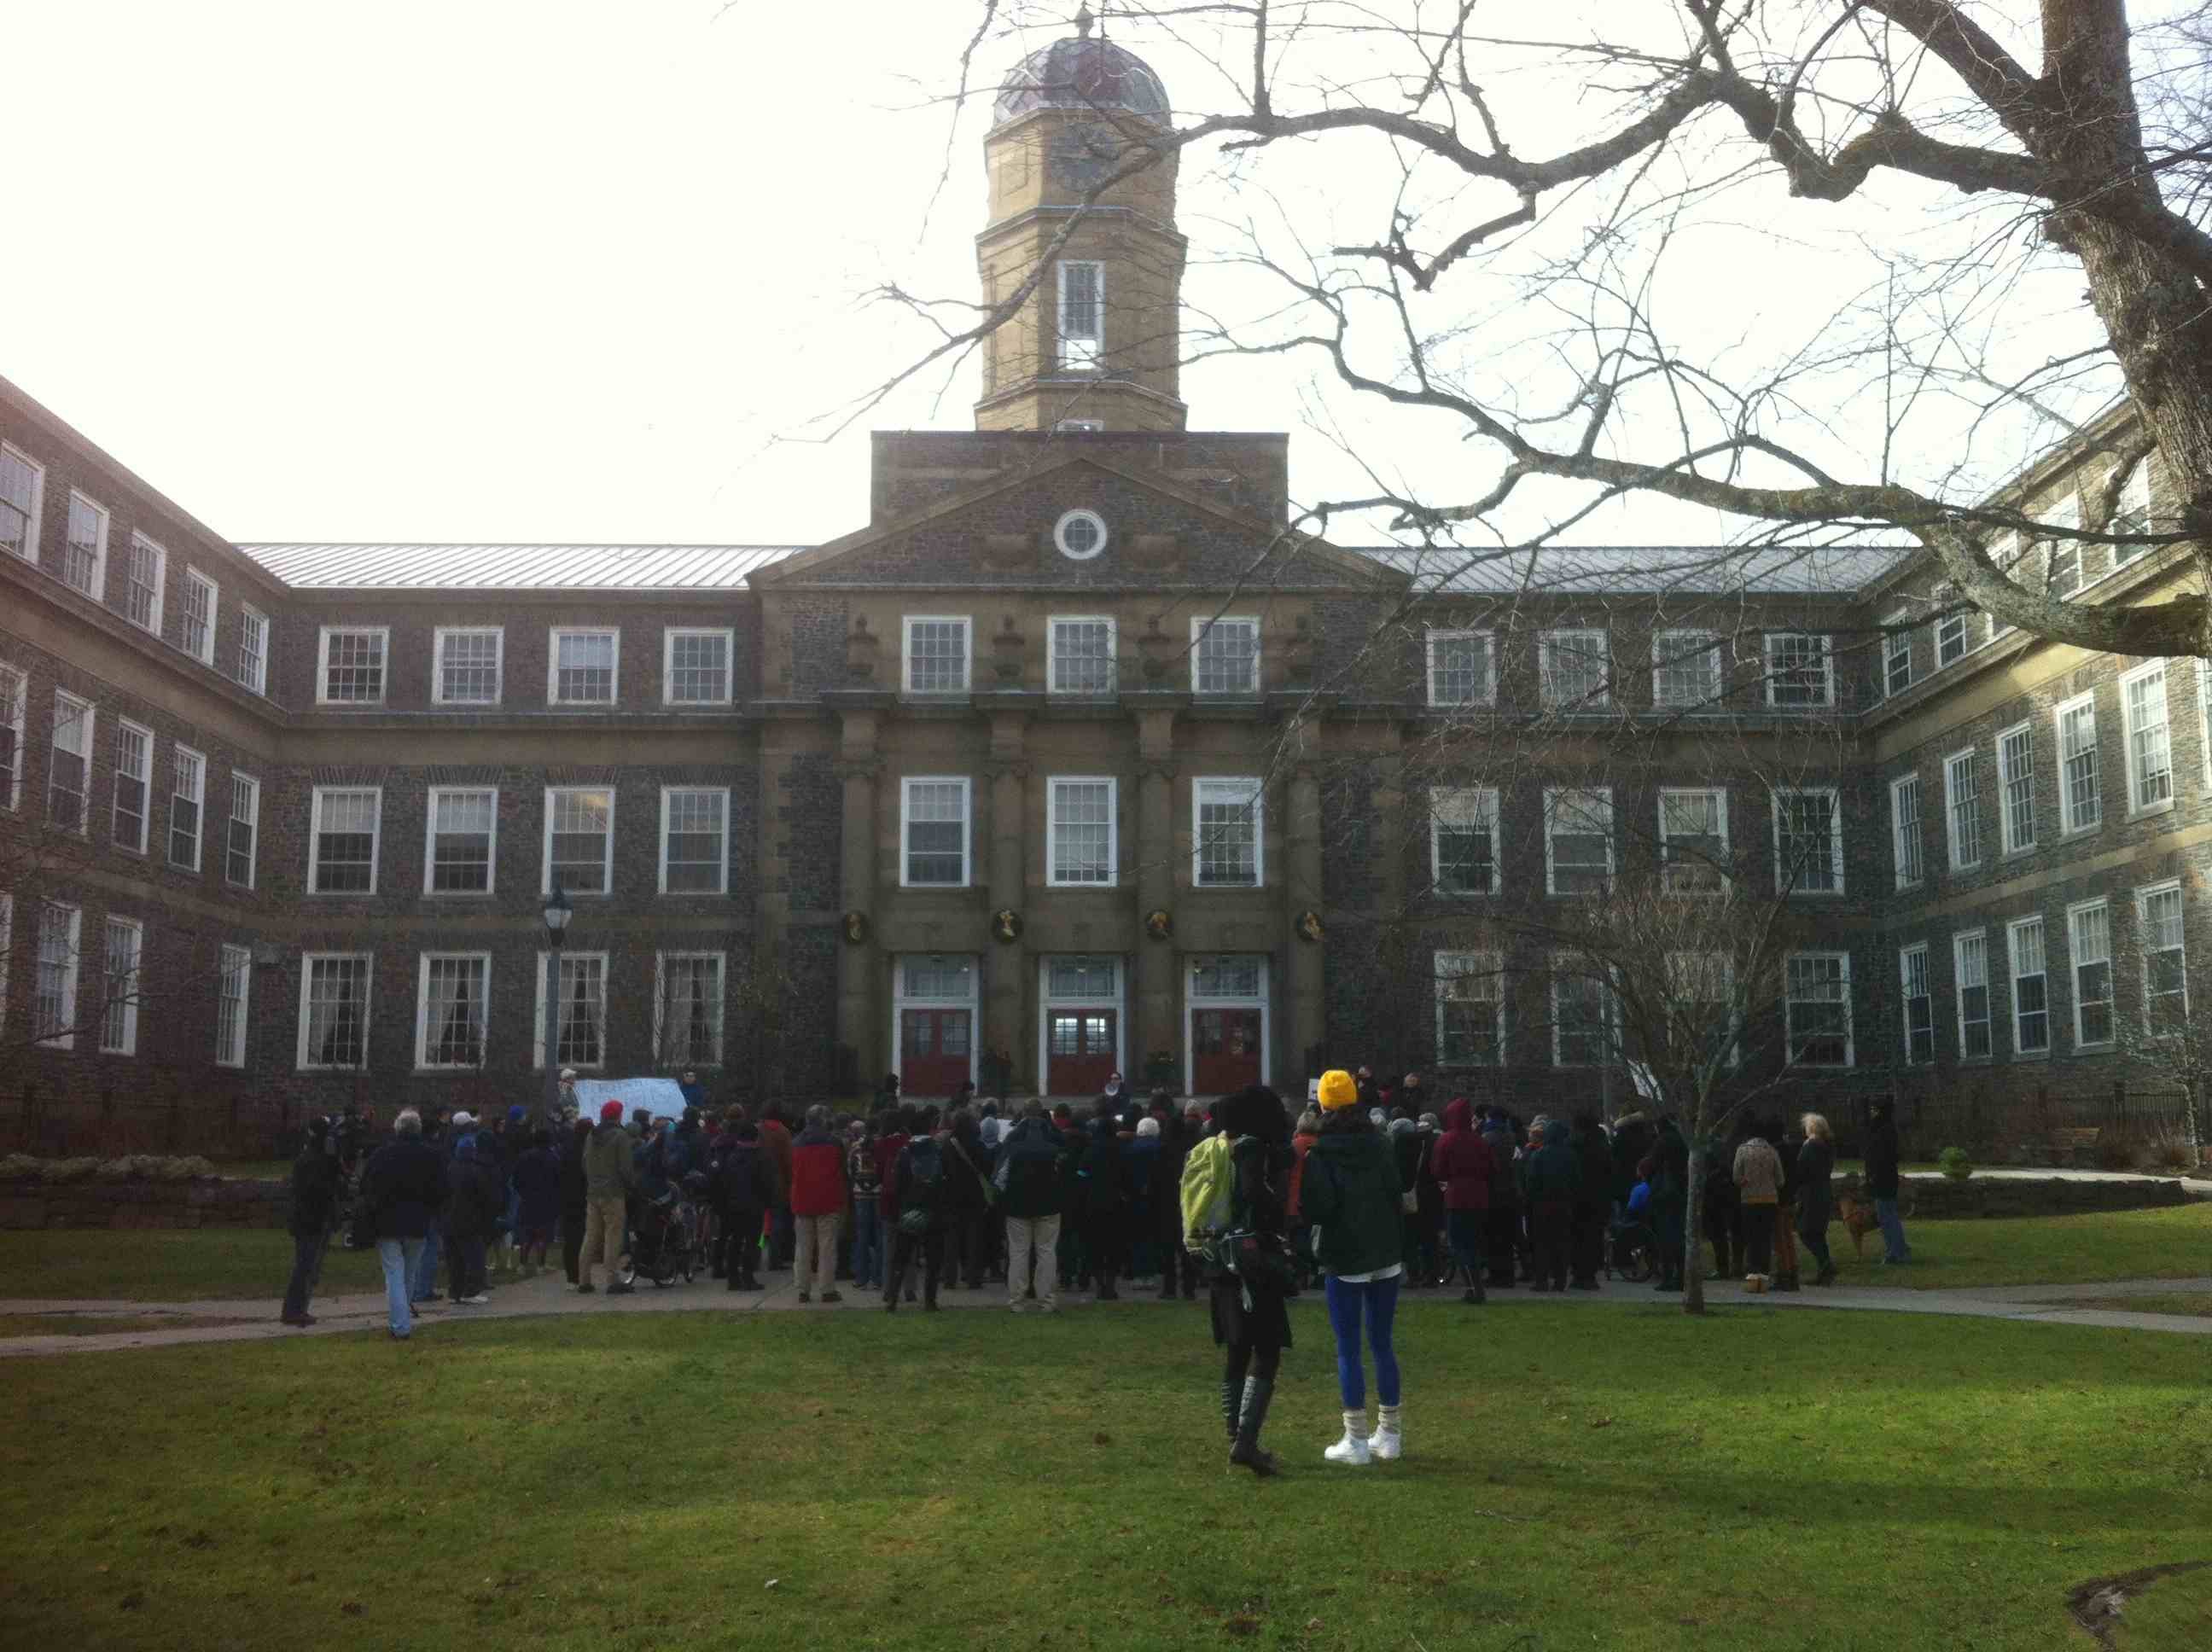 Over 200 protesters marched to Dalhousie’s Henry Hicks building on December 19 wanting the dentistry students responsible for hateful, sexist Facebook posts expelled.